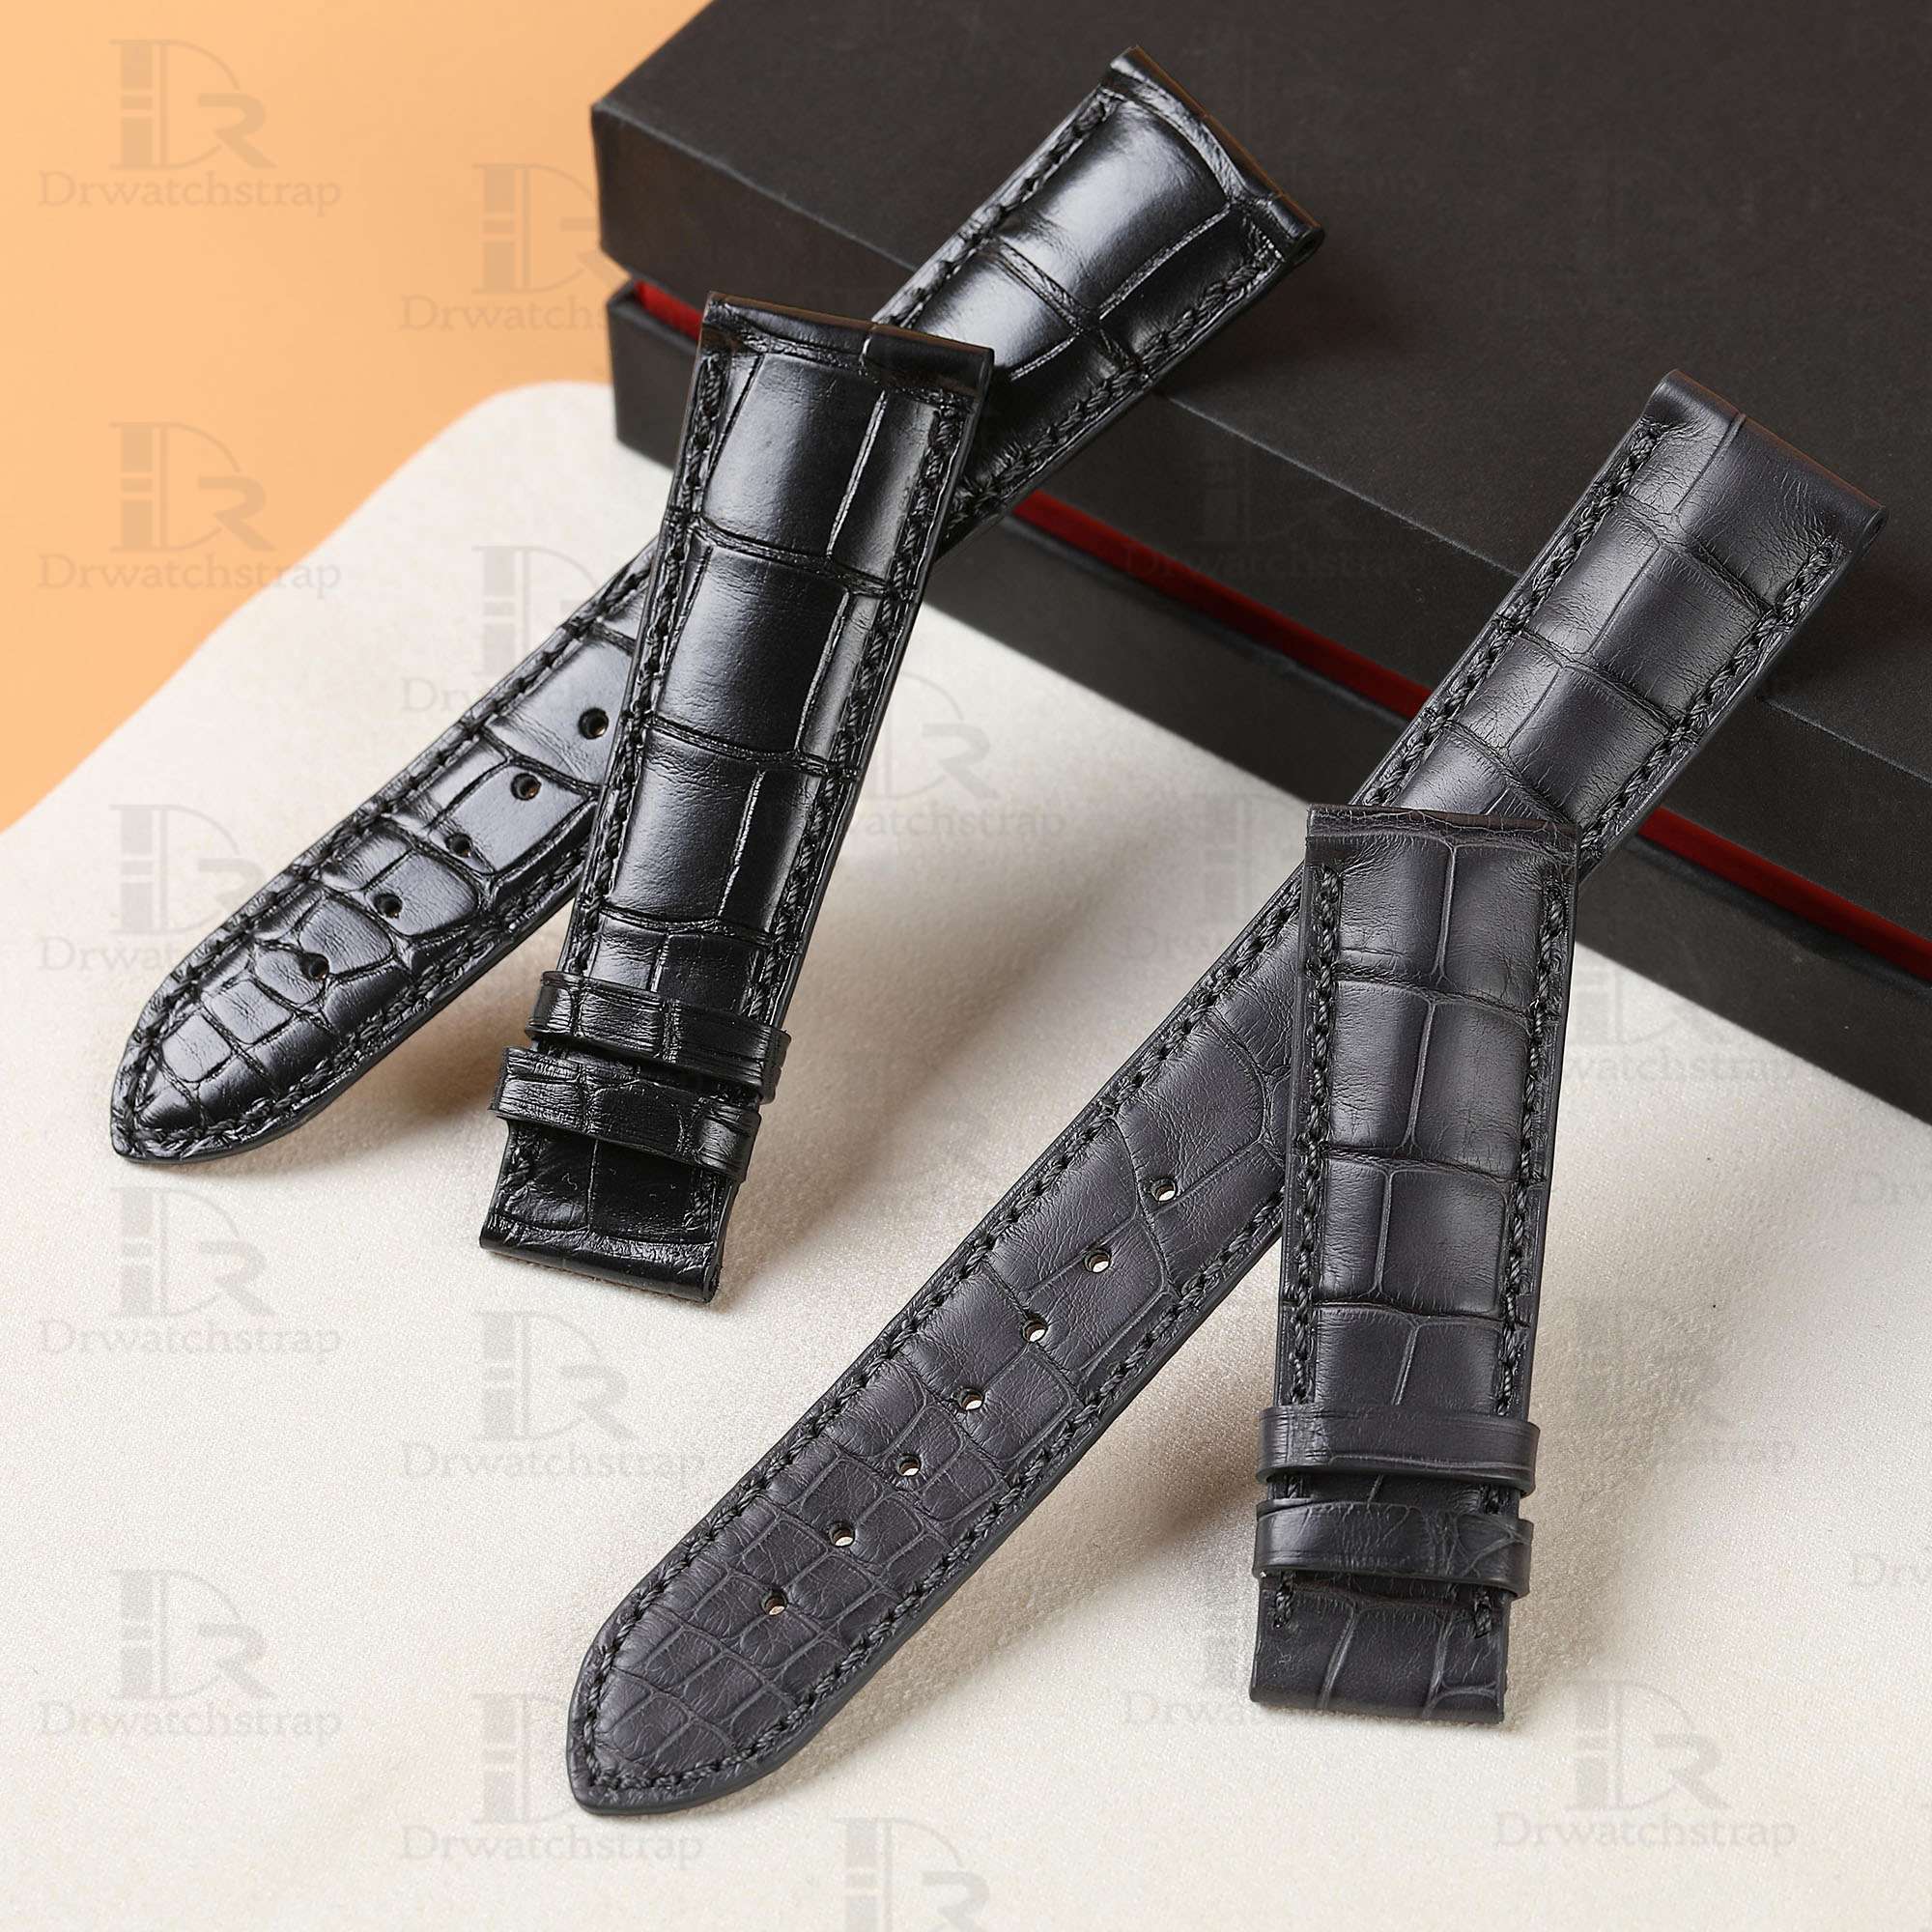 Buy Custom grey Alligator leather watch strap for Grand Seiko band replacement watchband for sale